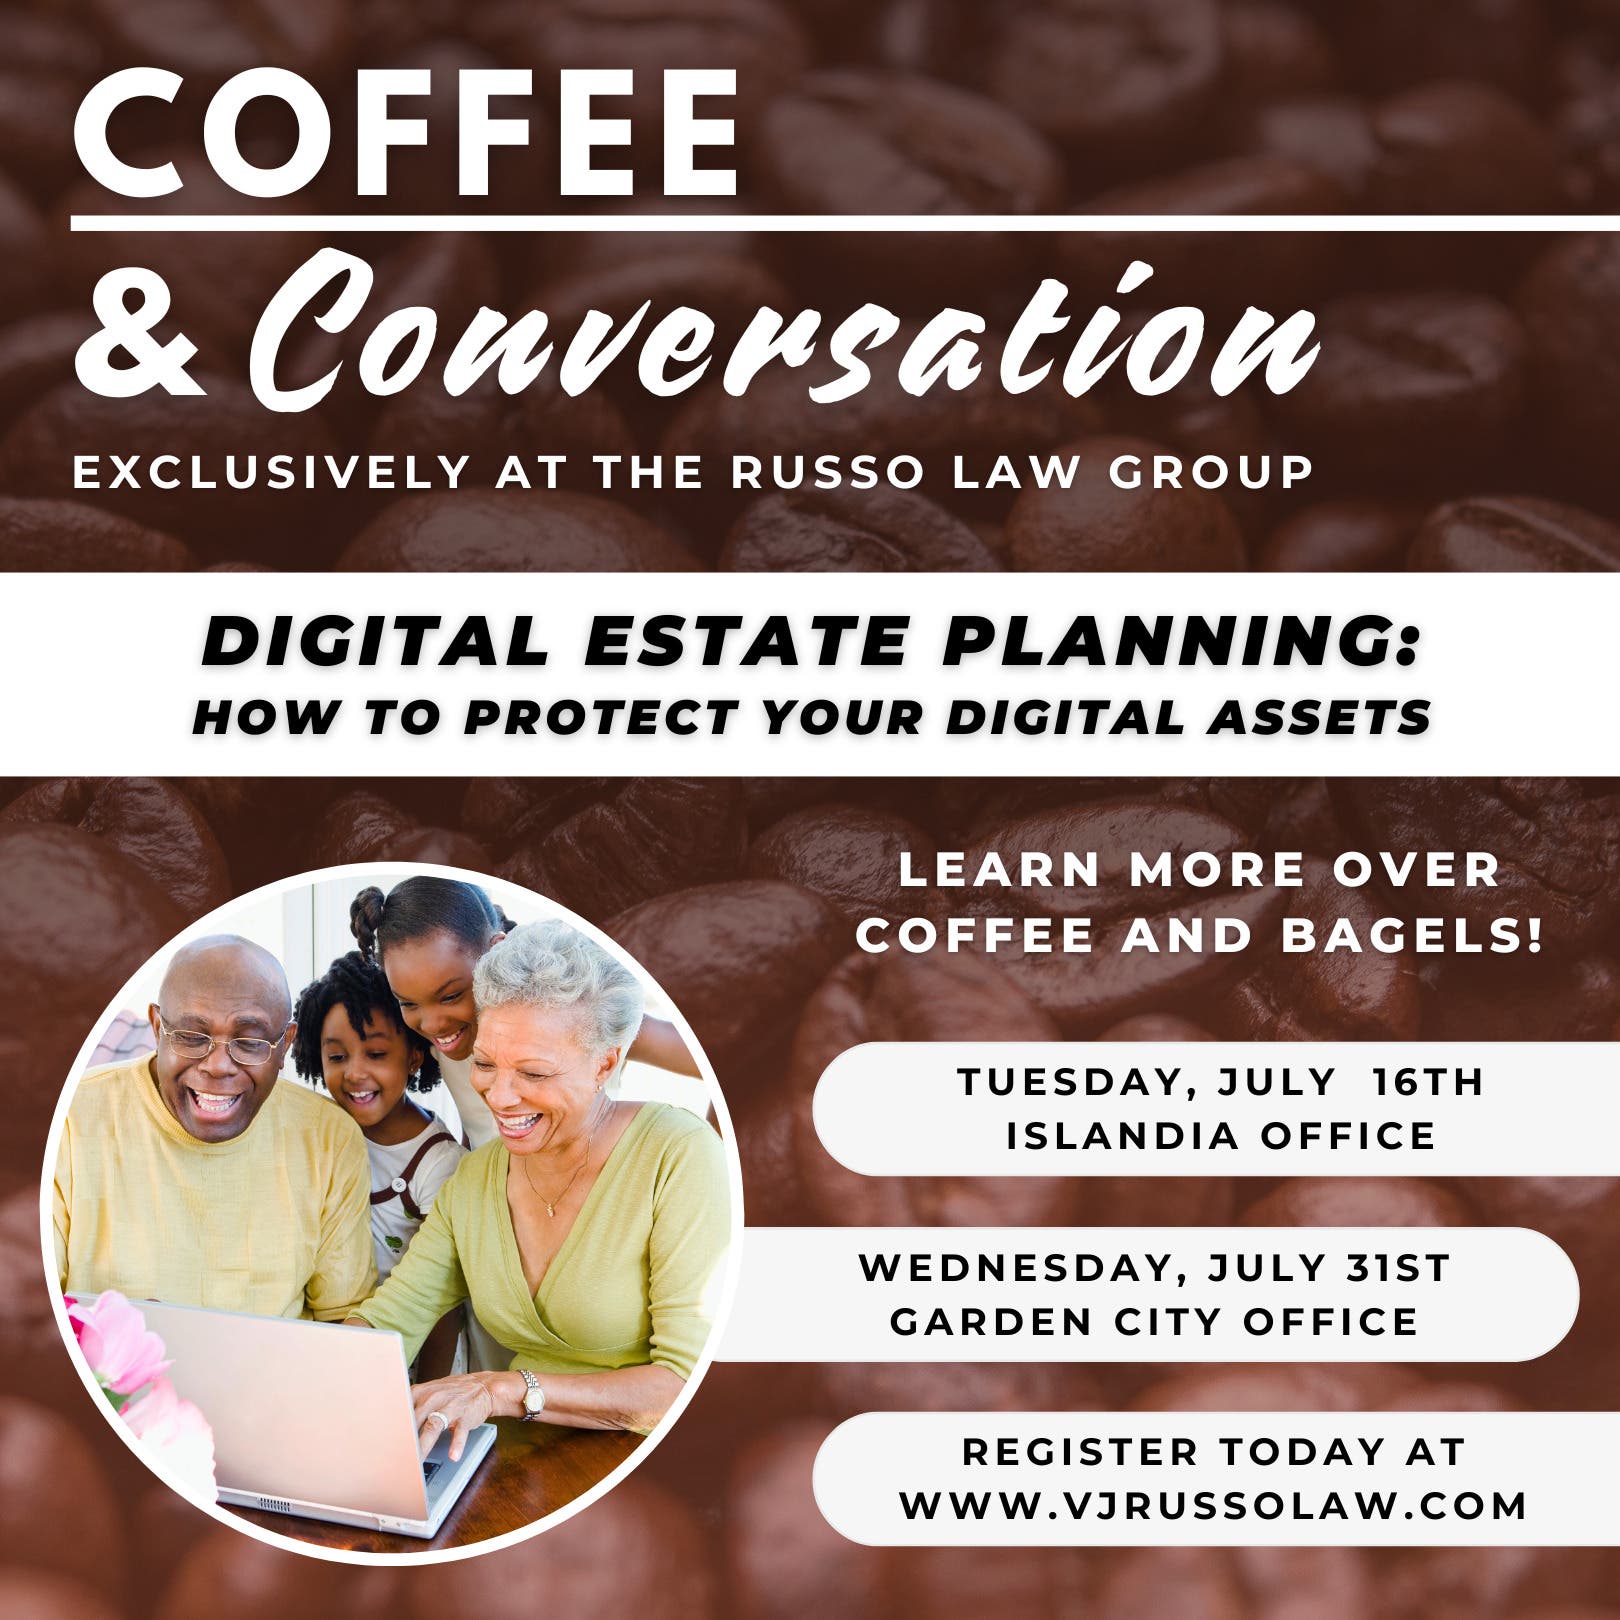 Coffee & Conversation: “Digital Estate Planning: How to Protect Your Digital Assets”